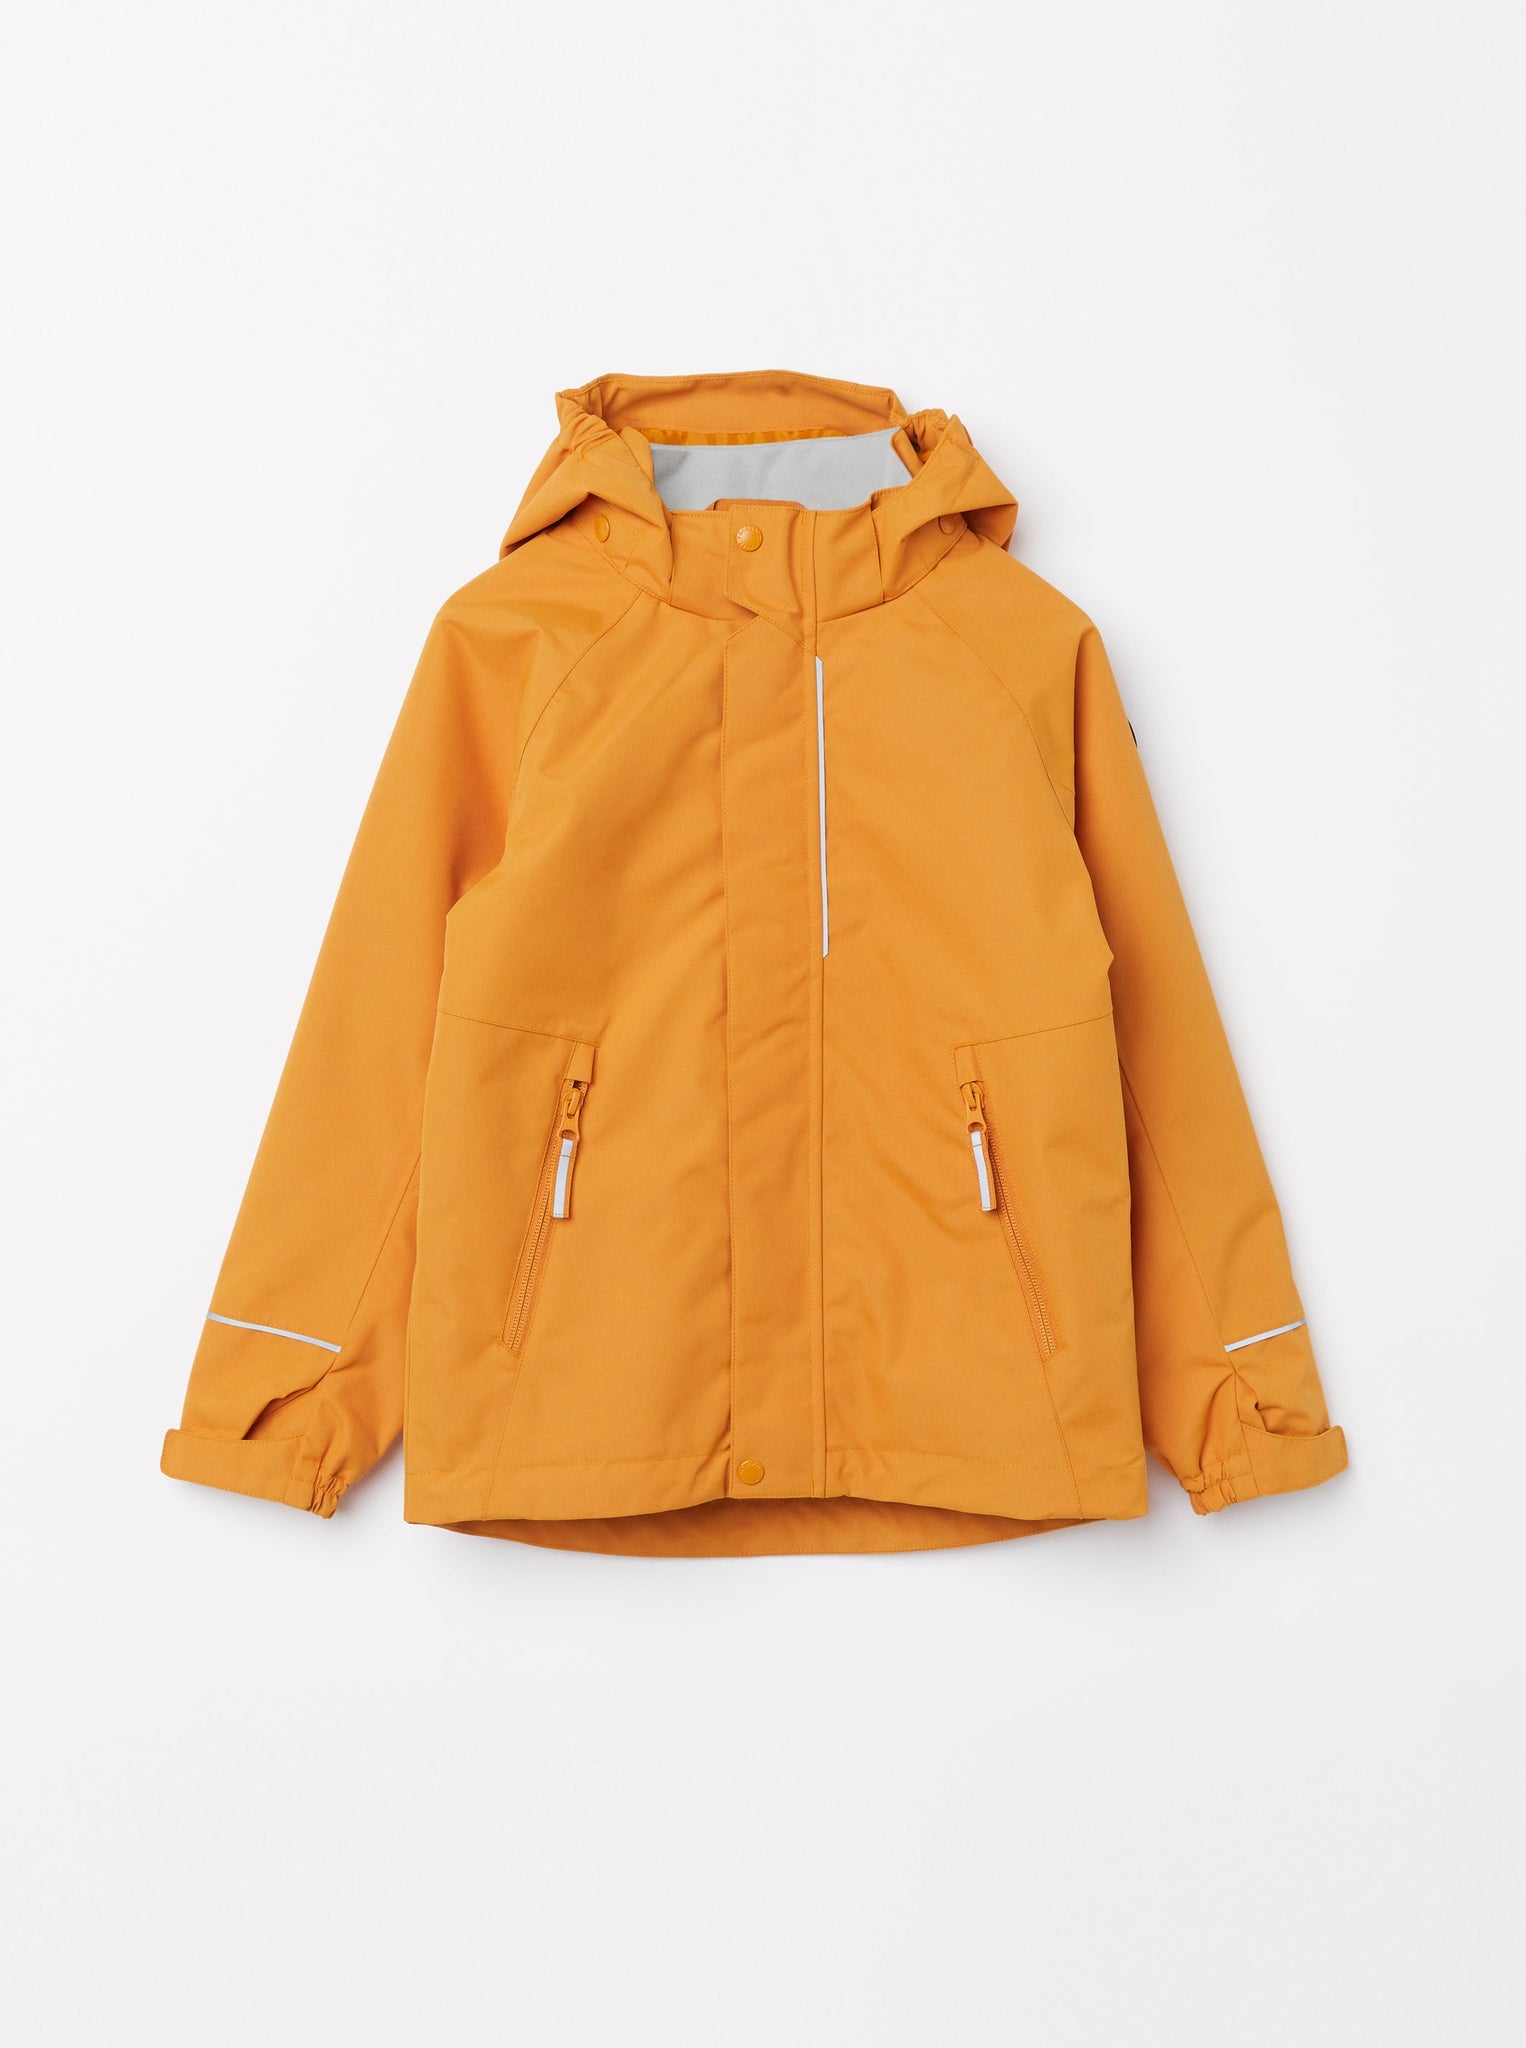 Extendable Yellow Kids Waterproof Coat from the Polarn O. Pyret kidswear collection. Made using ethically sourced materials.